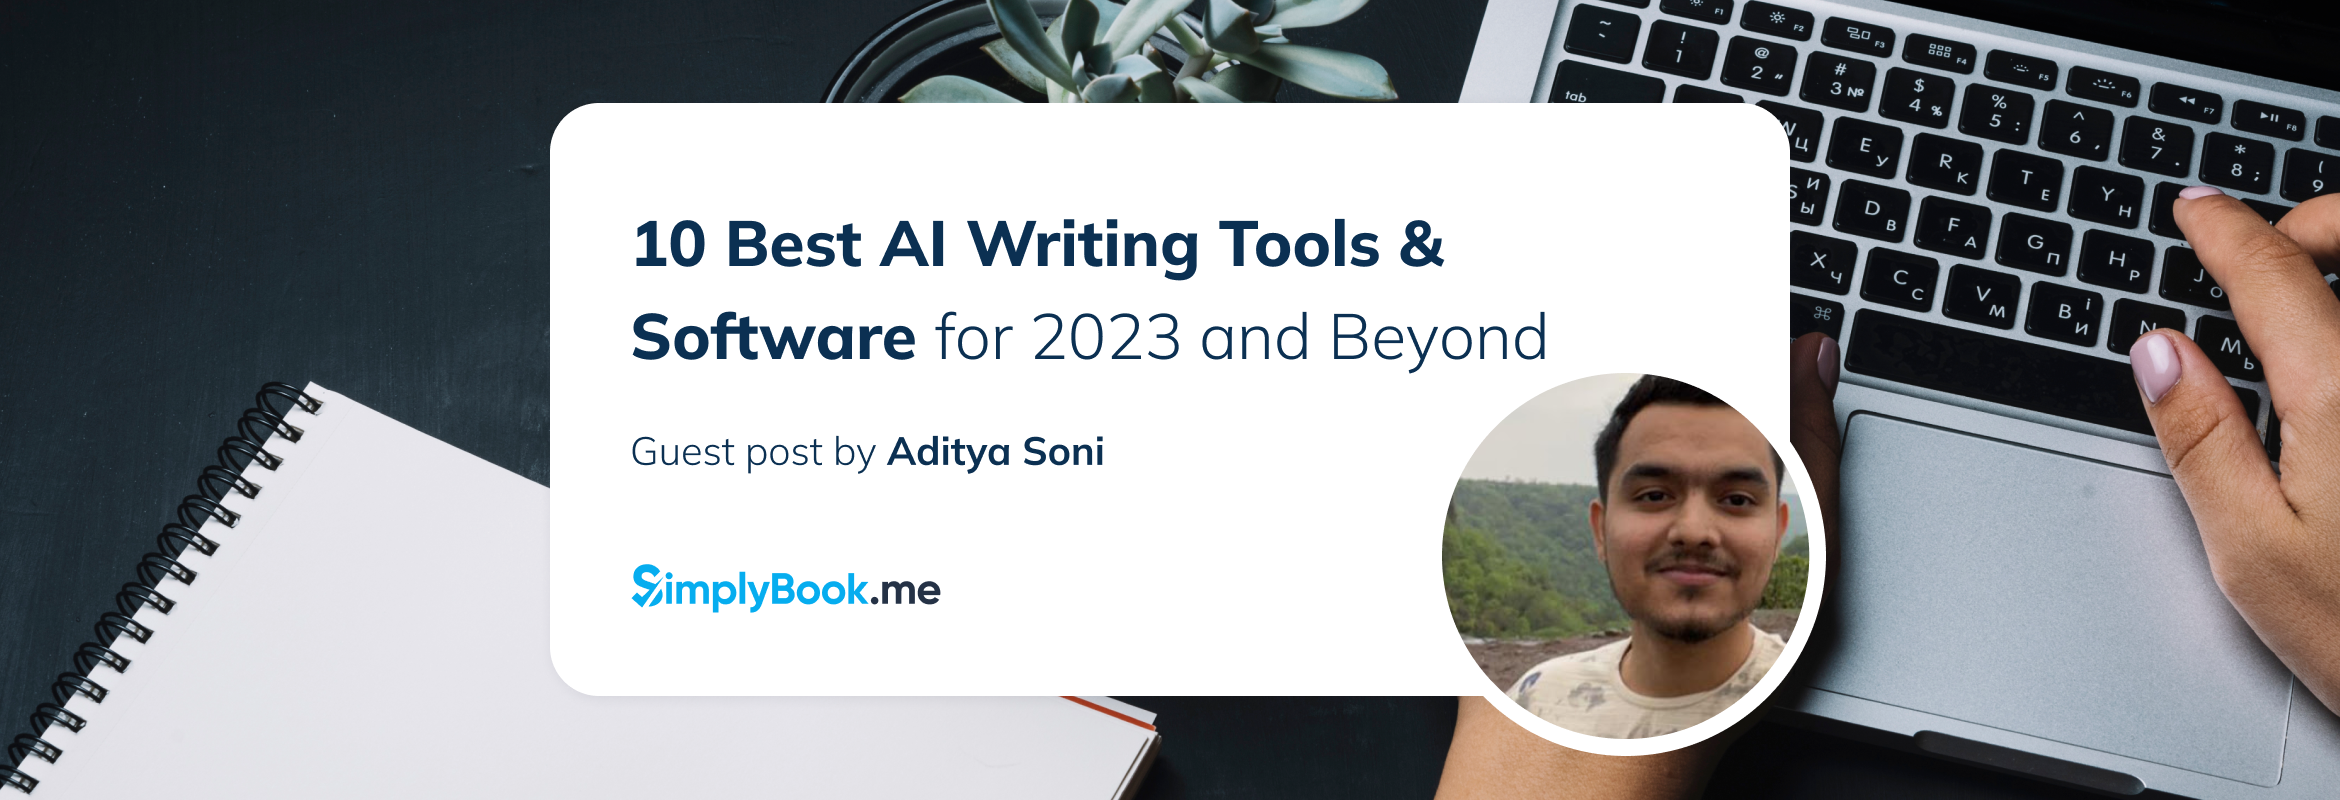 10 Best AI Writing Tools & Software for 2023 and Beyond